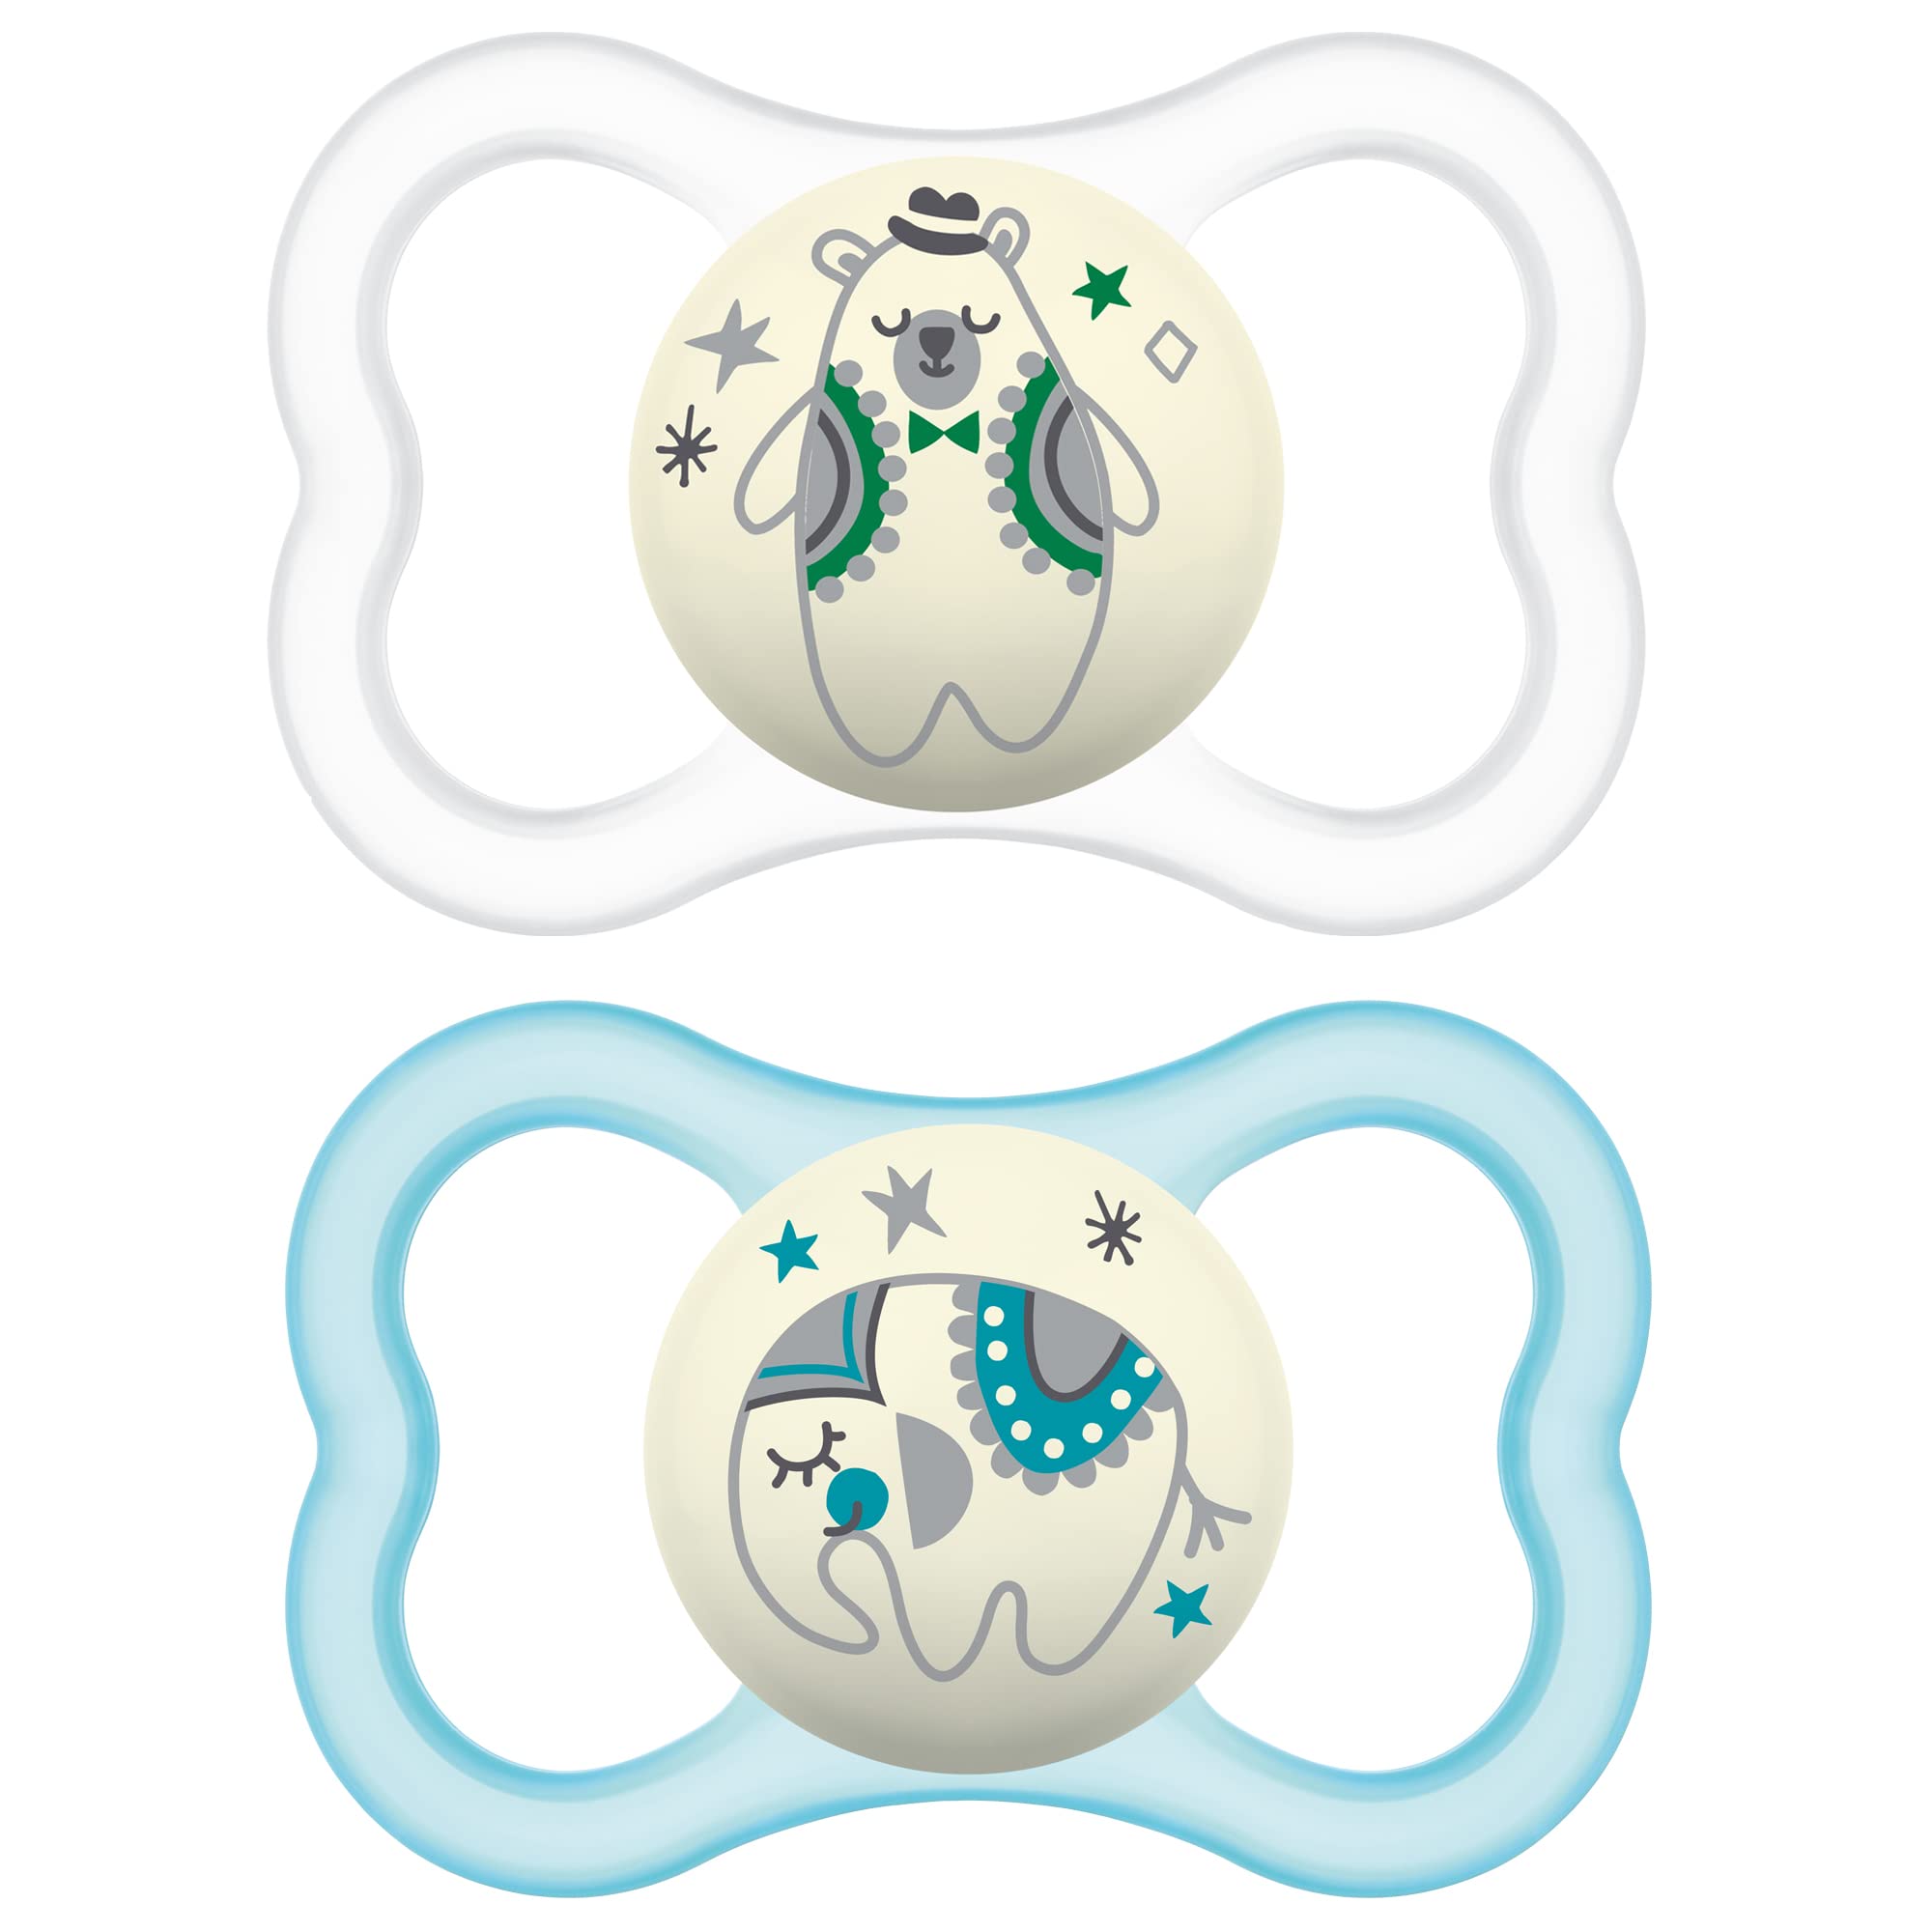 MAM Air Night Pacifiers , MAM Sensitive Skin Pacifier 6+ Months, glow in the Dark Pacifier, Best Pacifier for Breastfed Babies,